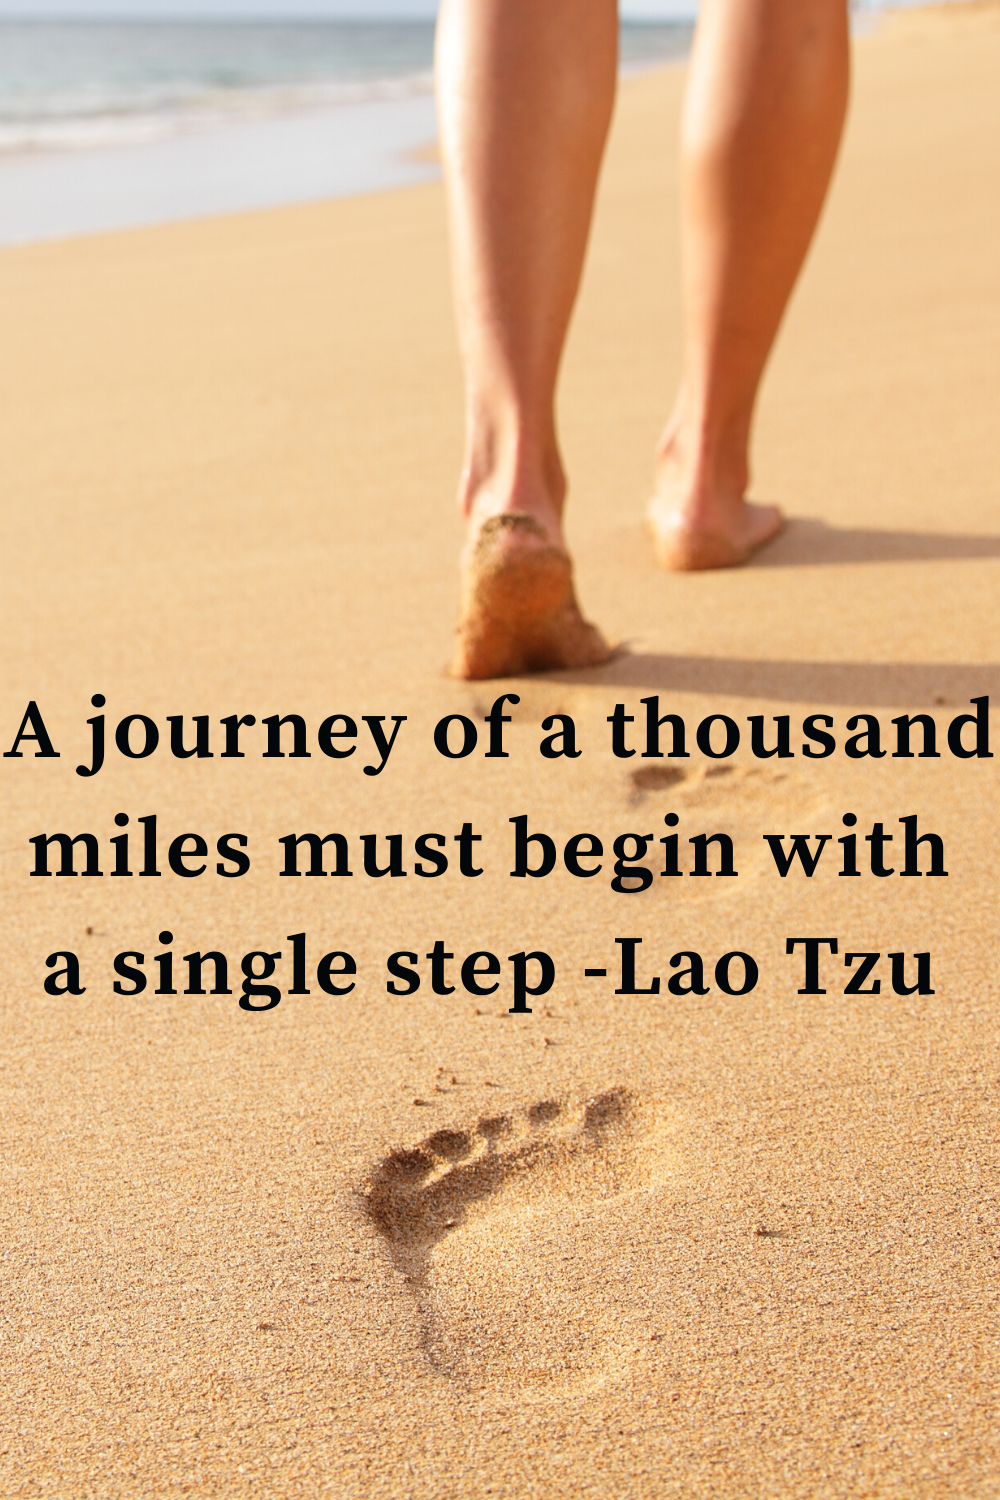 Motivation quote -- A journey of a thousand miles must begin with a single step